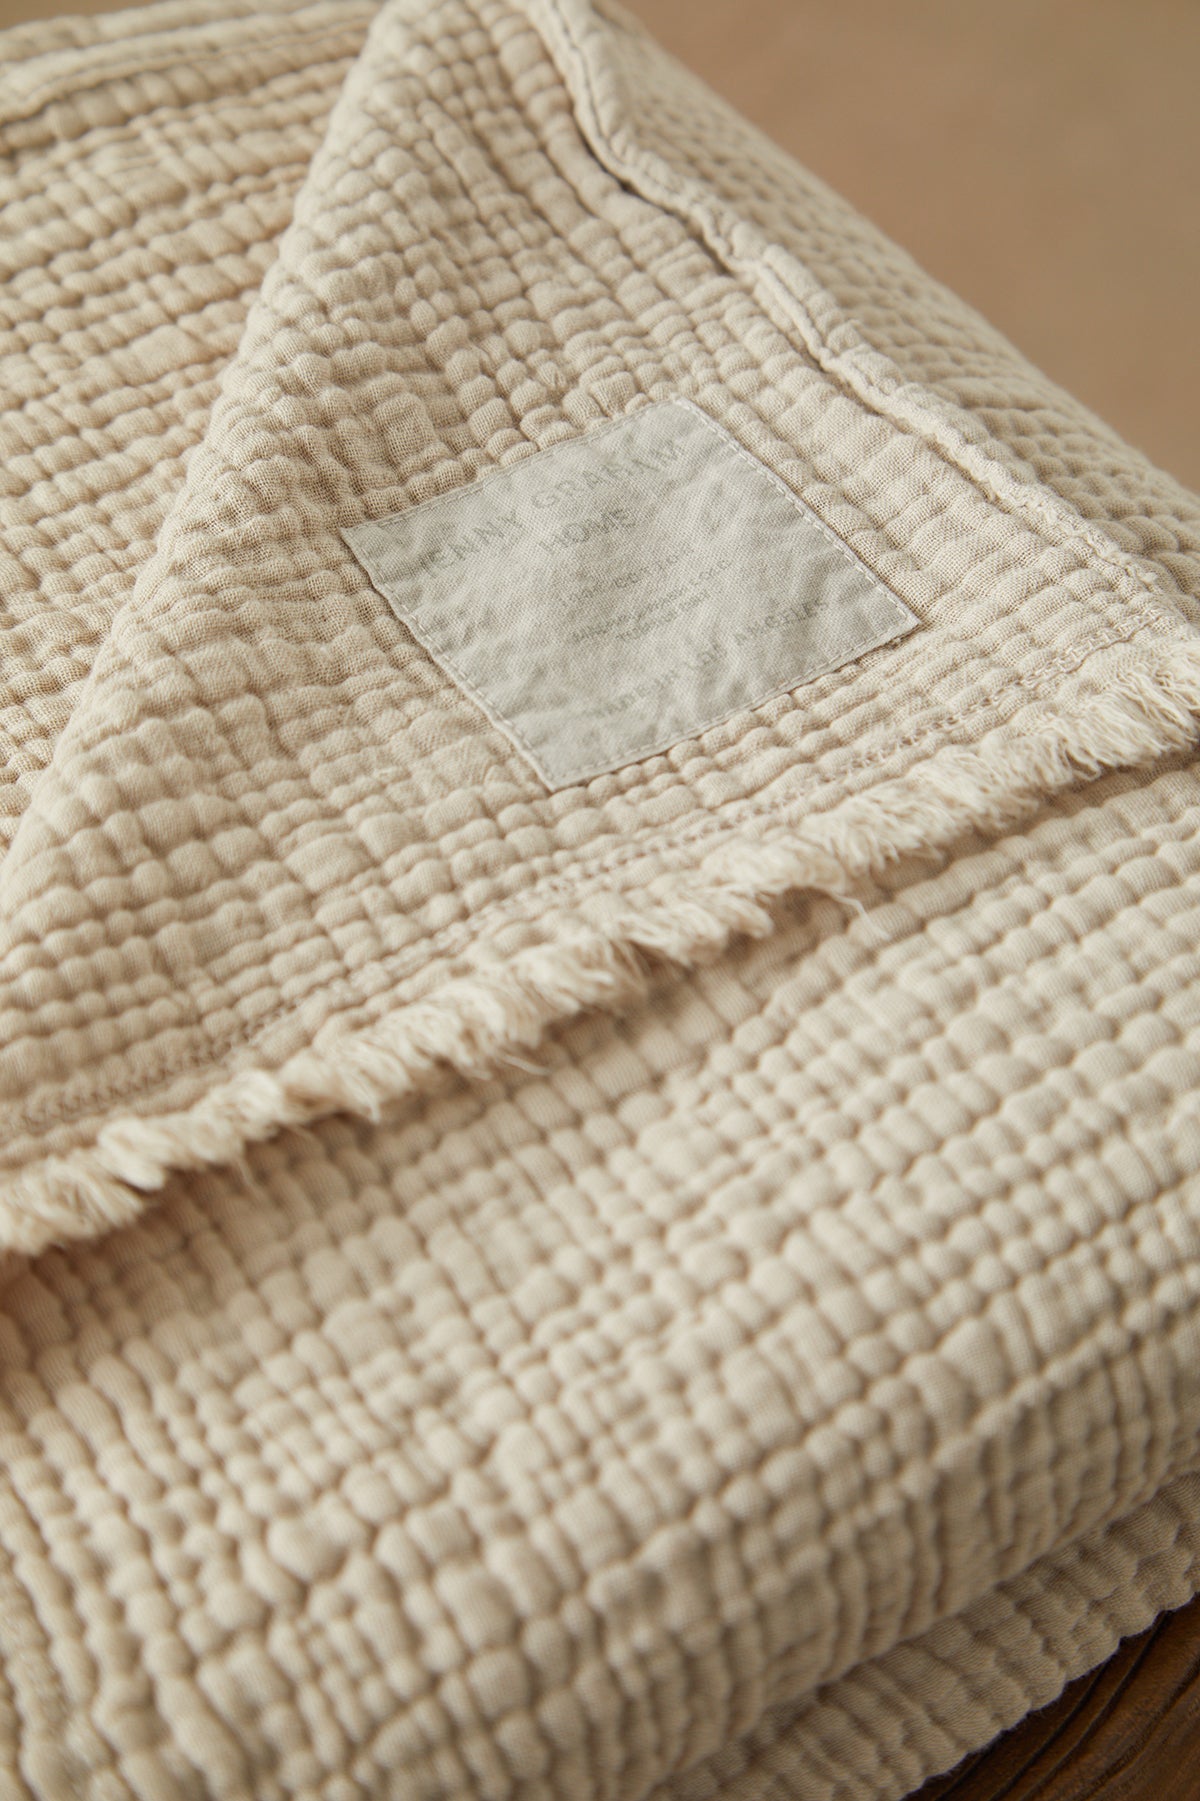 A Jenny Graham Home beige Cotton Gauze Throw folded on top of a wooden table.-25520554213569